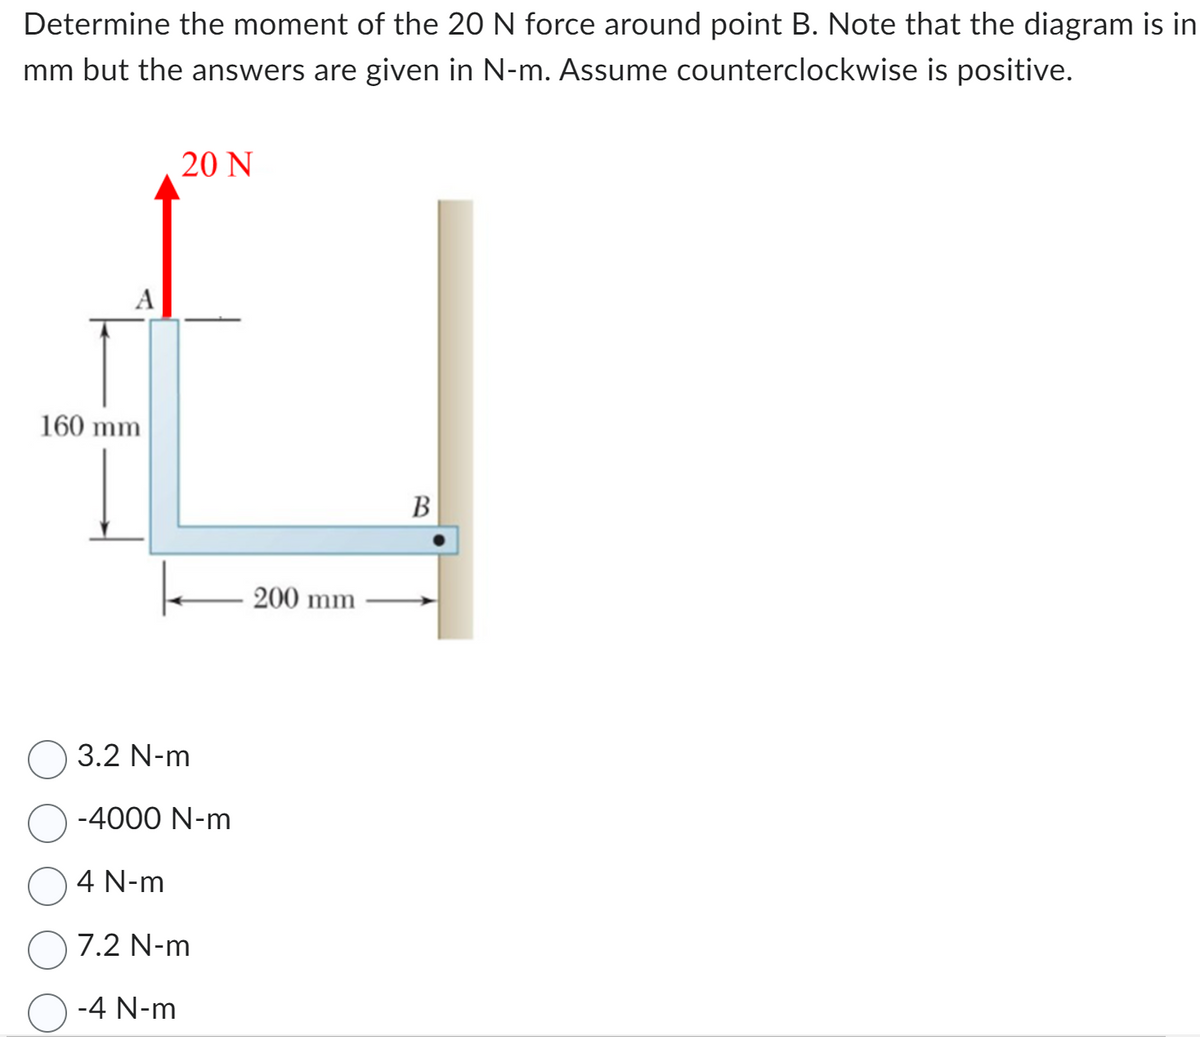 Determine the moment of the 20 N force around point B. Note that the diagram is in
mm but the answers are given in N-m. Assume counterclockwise is positive.
A
160 mm
20 N
k
3.2 N-m
-4000 N-m
4 N-m
7.2 N-m
O-4 N-m
200 mm
B